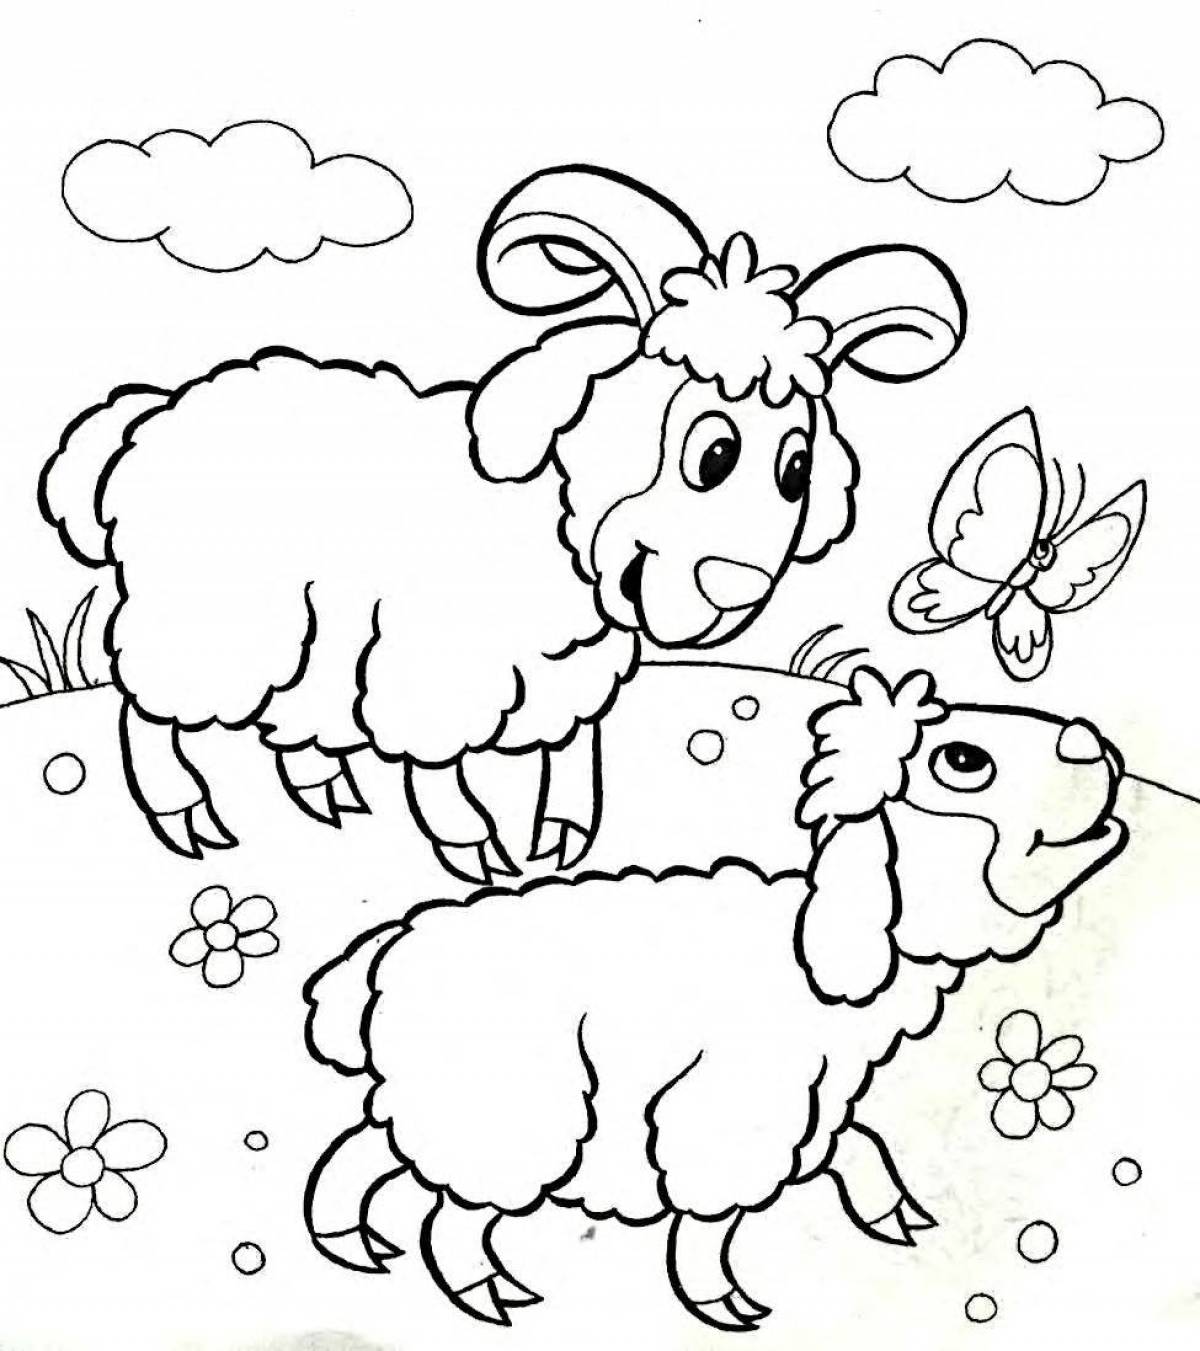 Live coloring pages of pets for kids